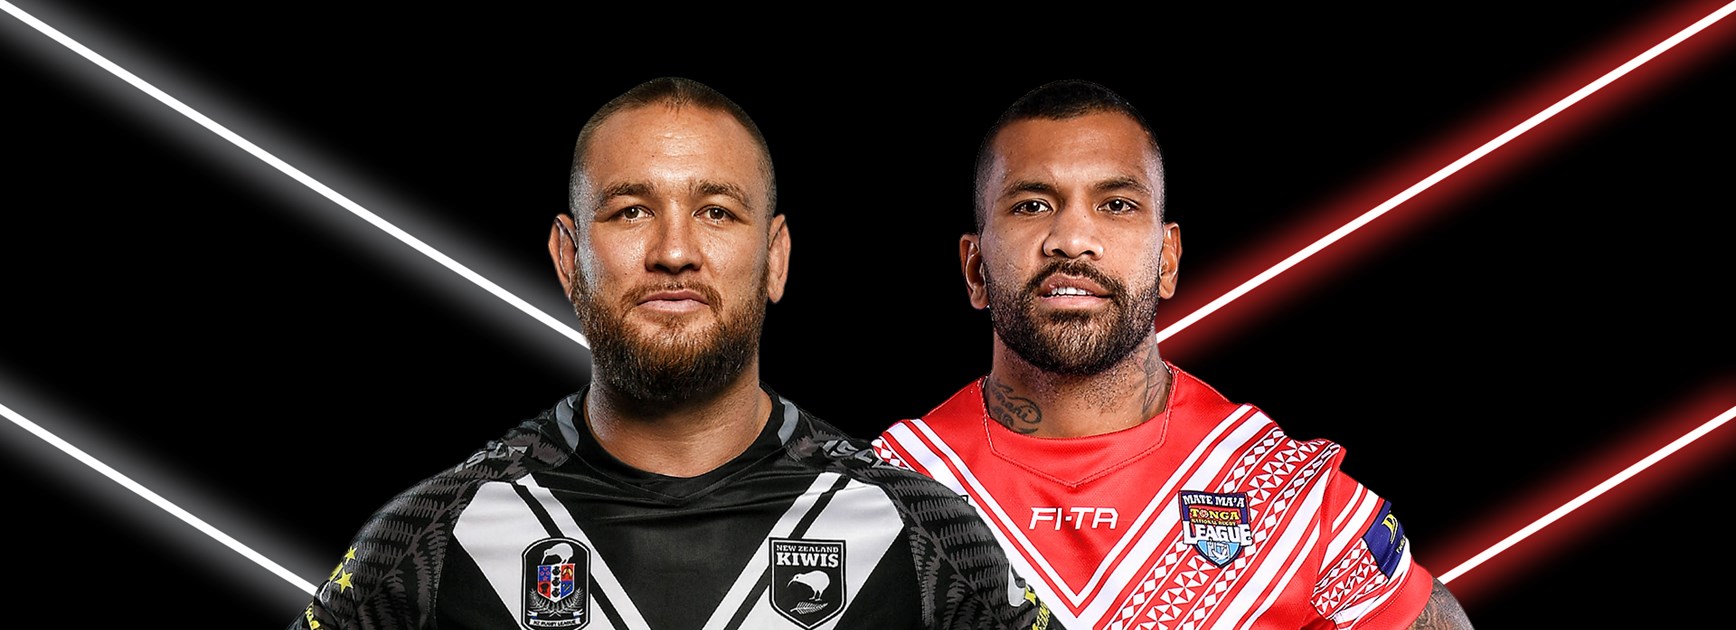 New Zealand v Tonga: Pacific Test preview